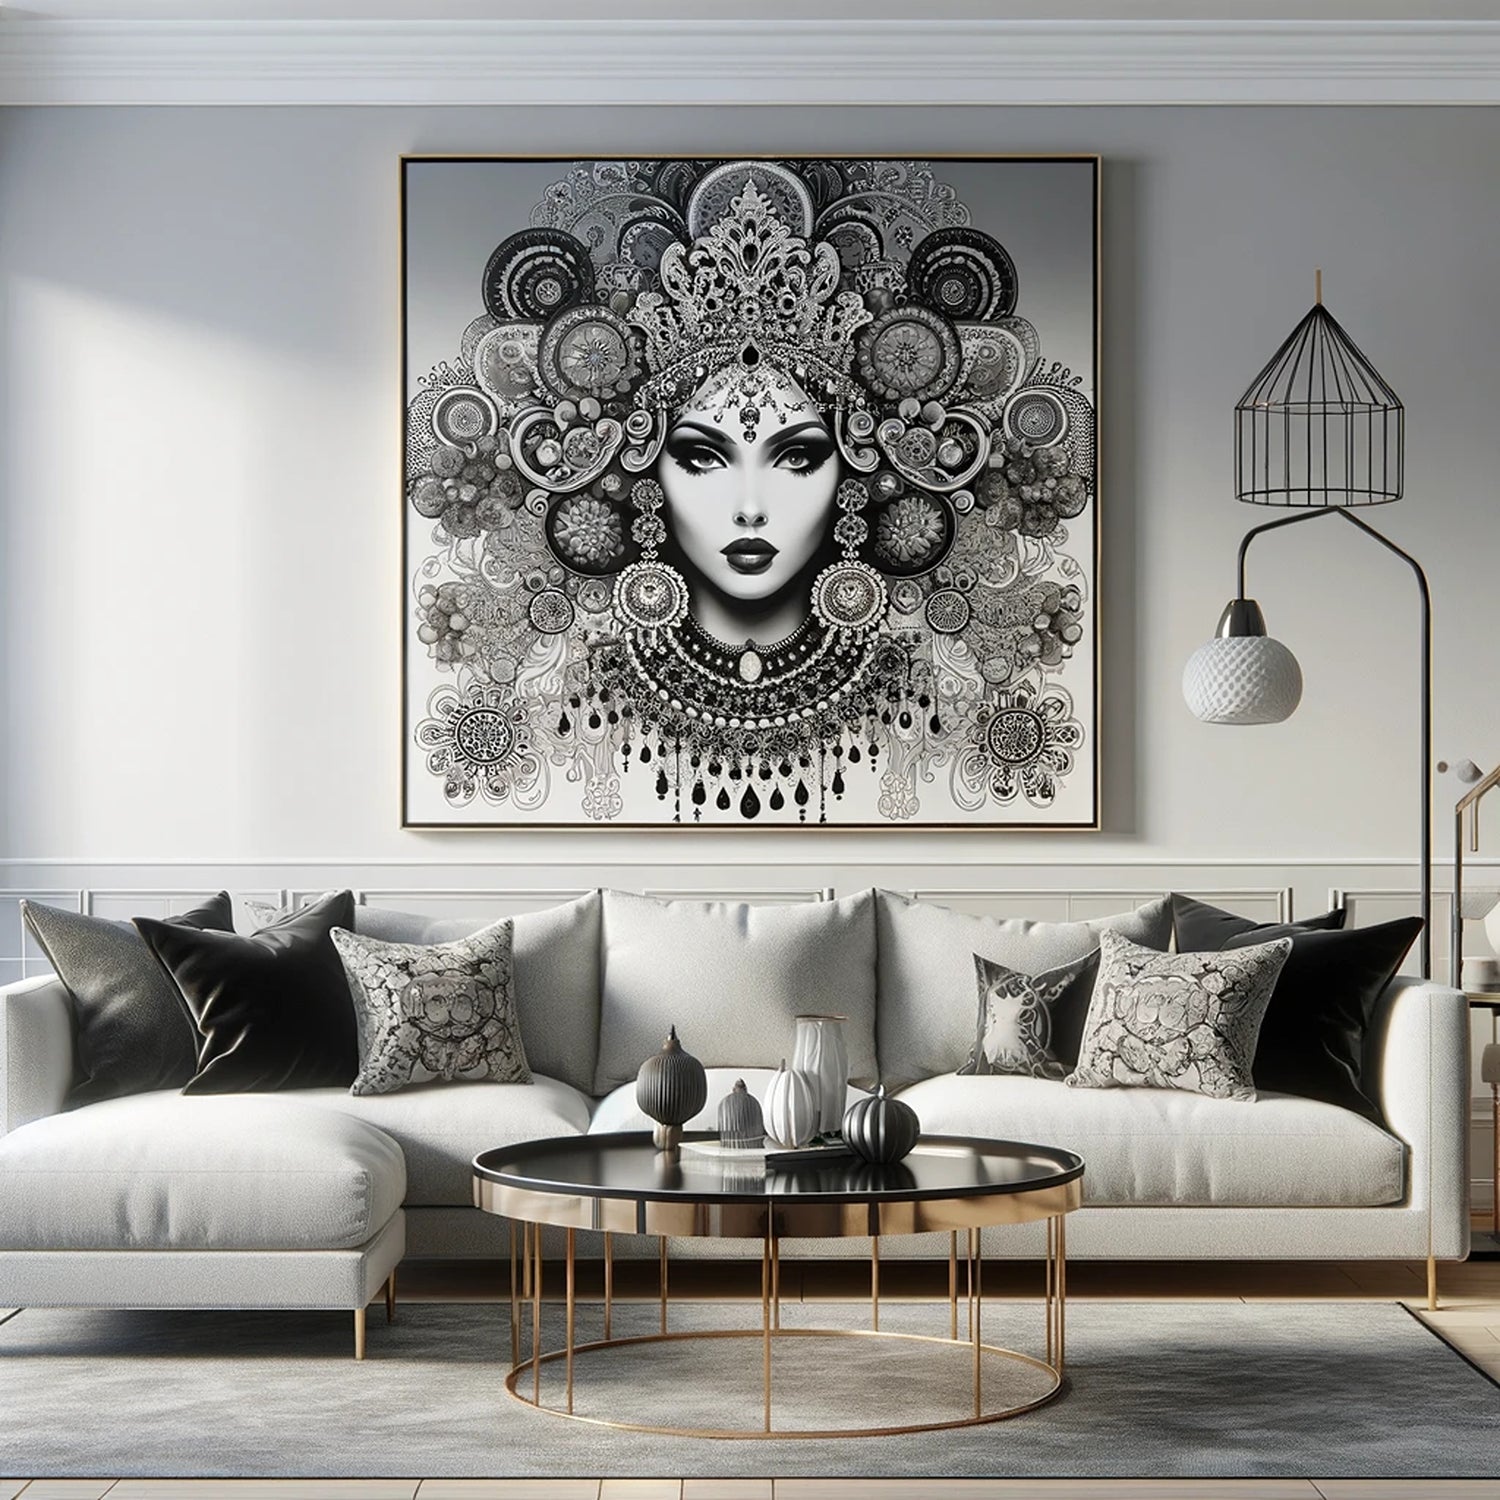 The "Eternal Elegance" collection is an exquisite assembly of digital art pieces that celebrate the timeless allure of the Art Deco movement infused with modern sensibilities